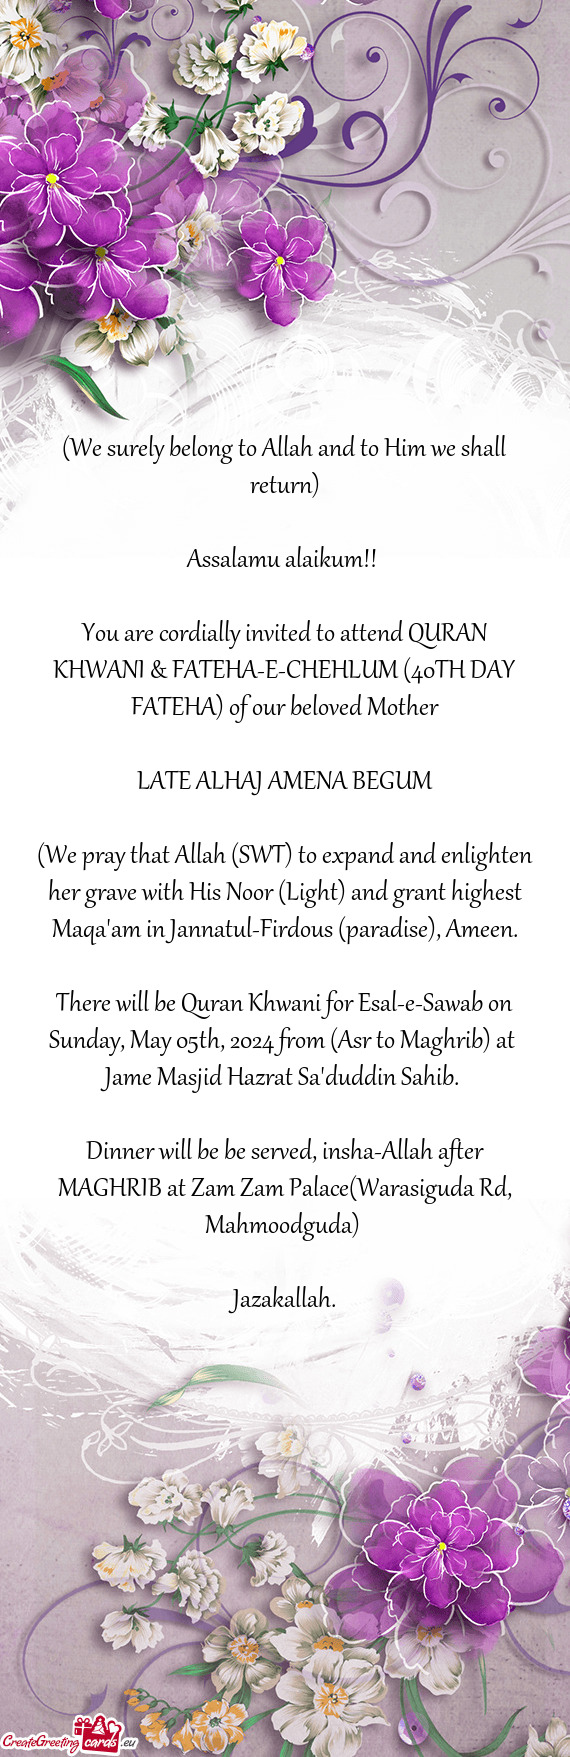 You are cordially invited to attend QURAN KHWANI & FATEHA-E-CHEHLUM (40TH DAY FATEHA) of our beloved